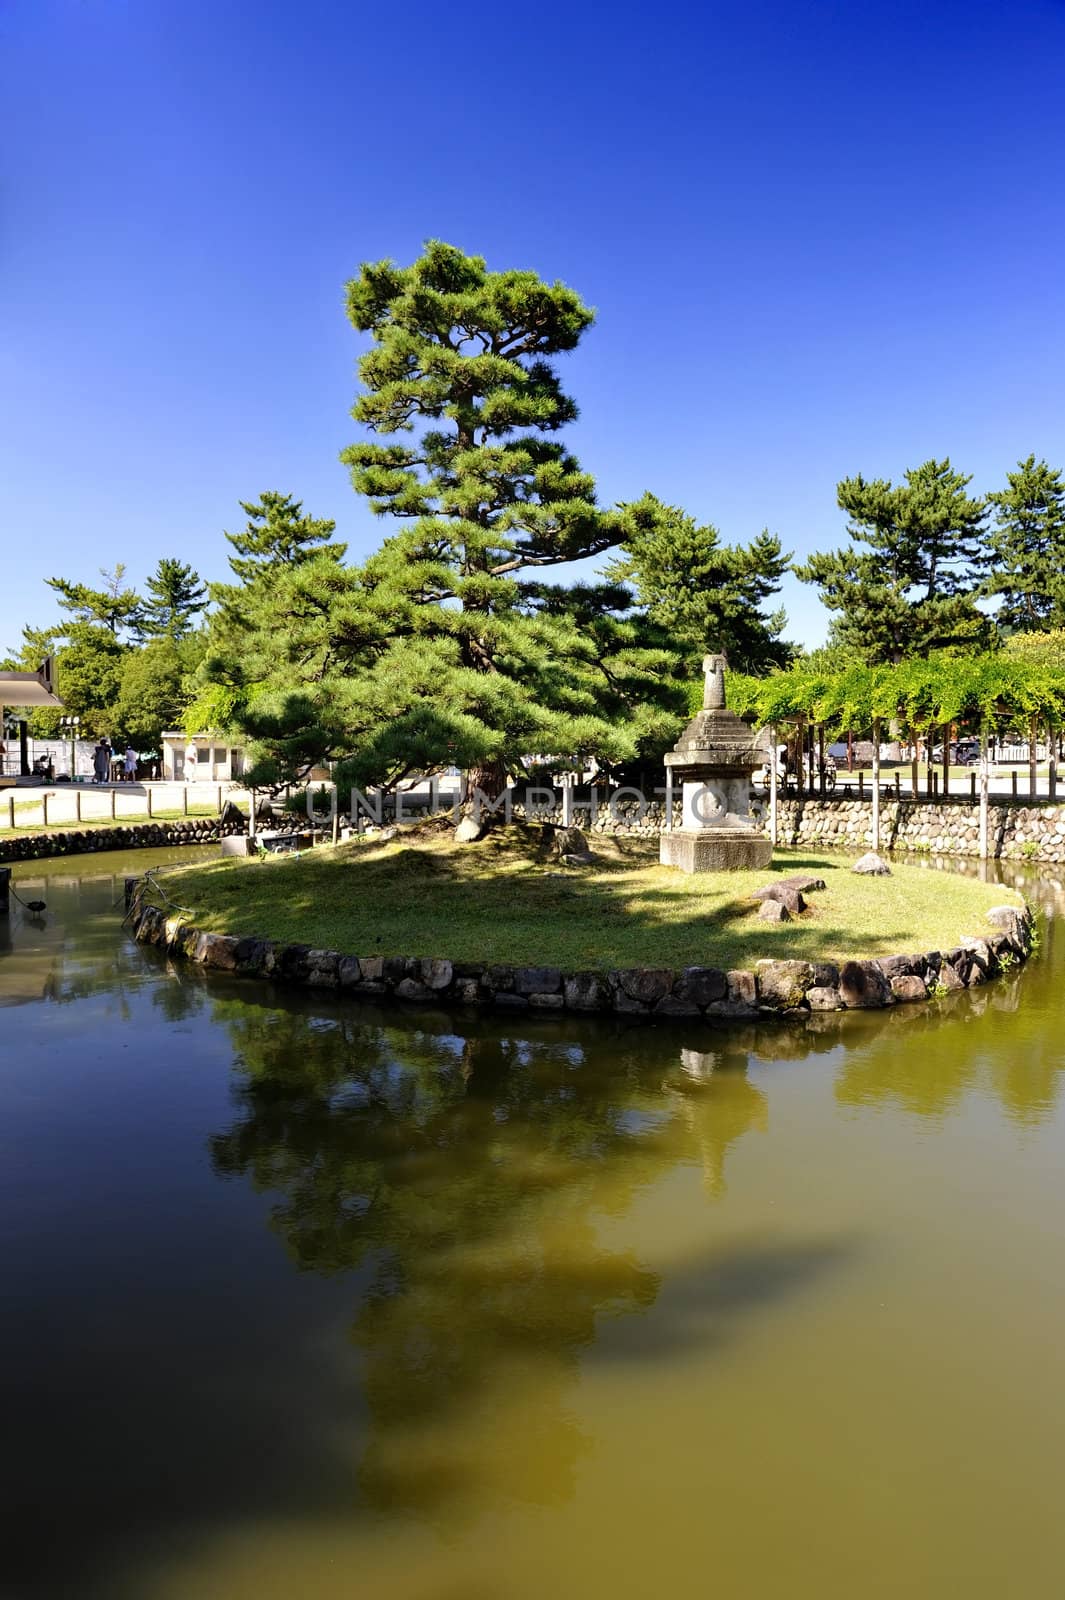 Detail of the Japanese garden - pine on the small island in the pond, Nara - Japan